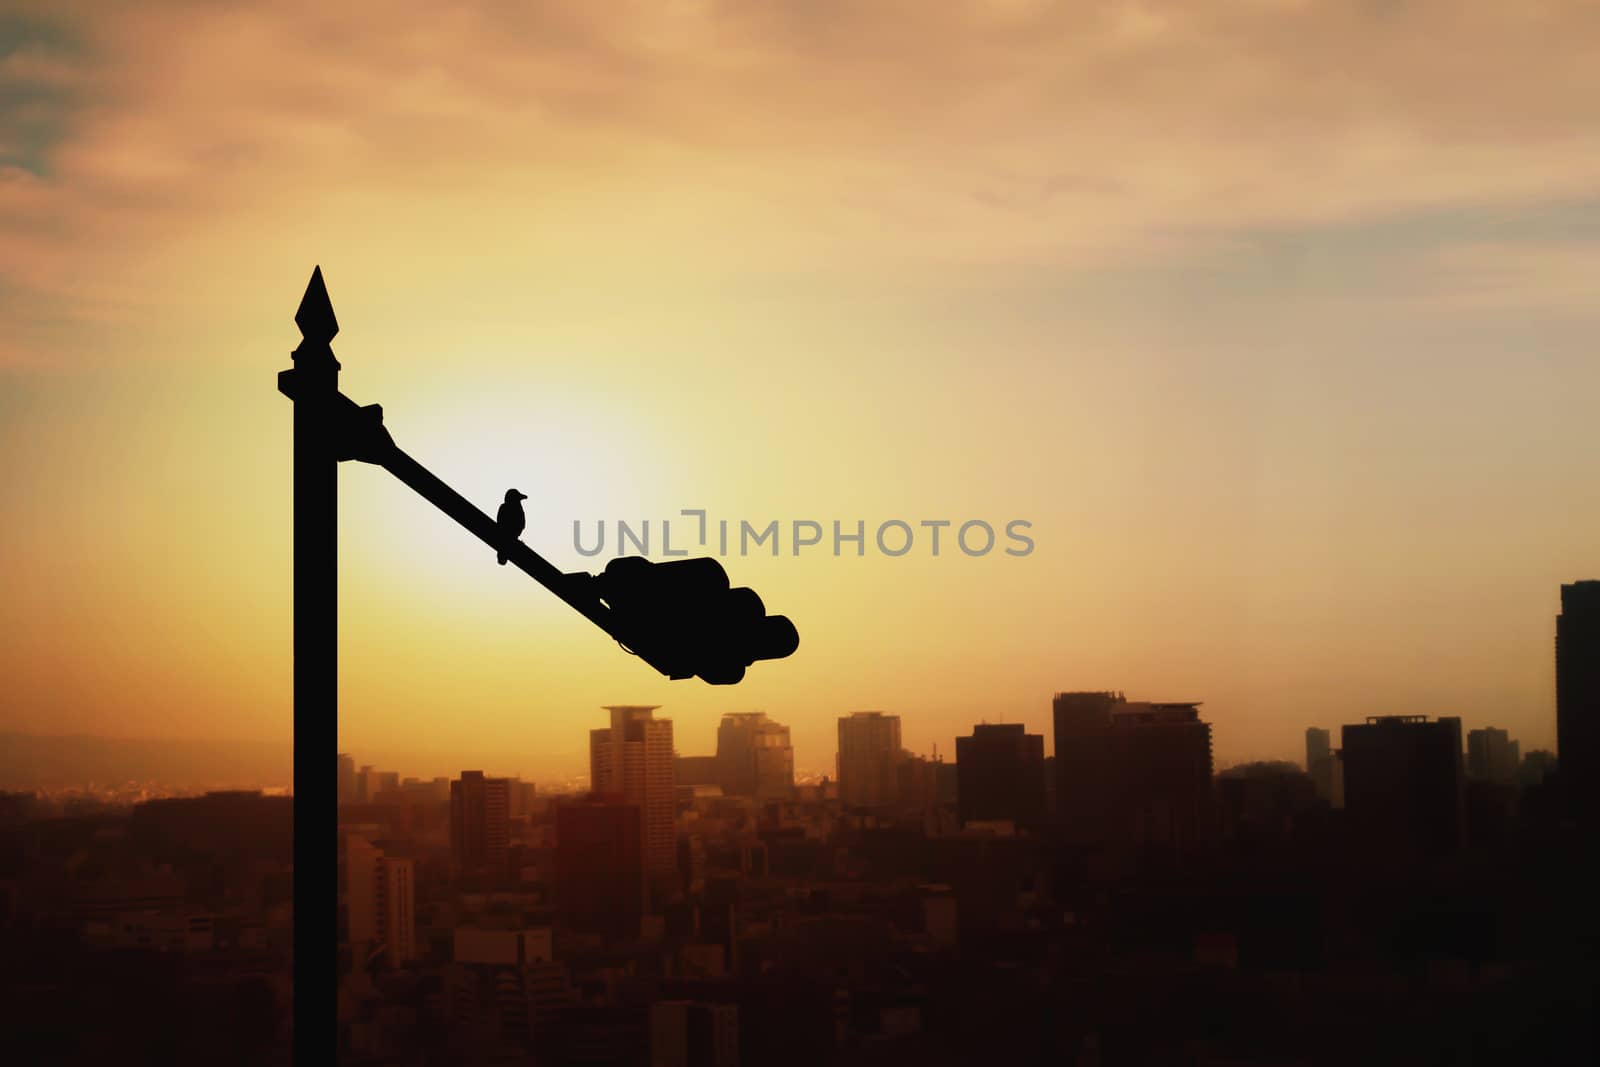 Shadow of a bird perched on a traffic light pole. Behind it is a view of the city in the evening. by Muangngam